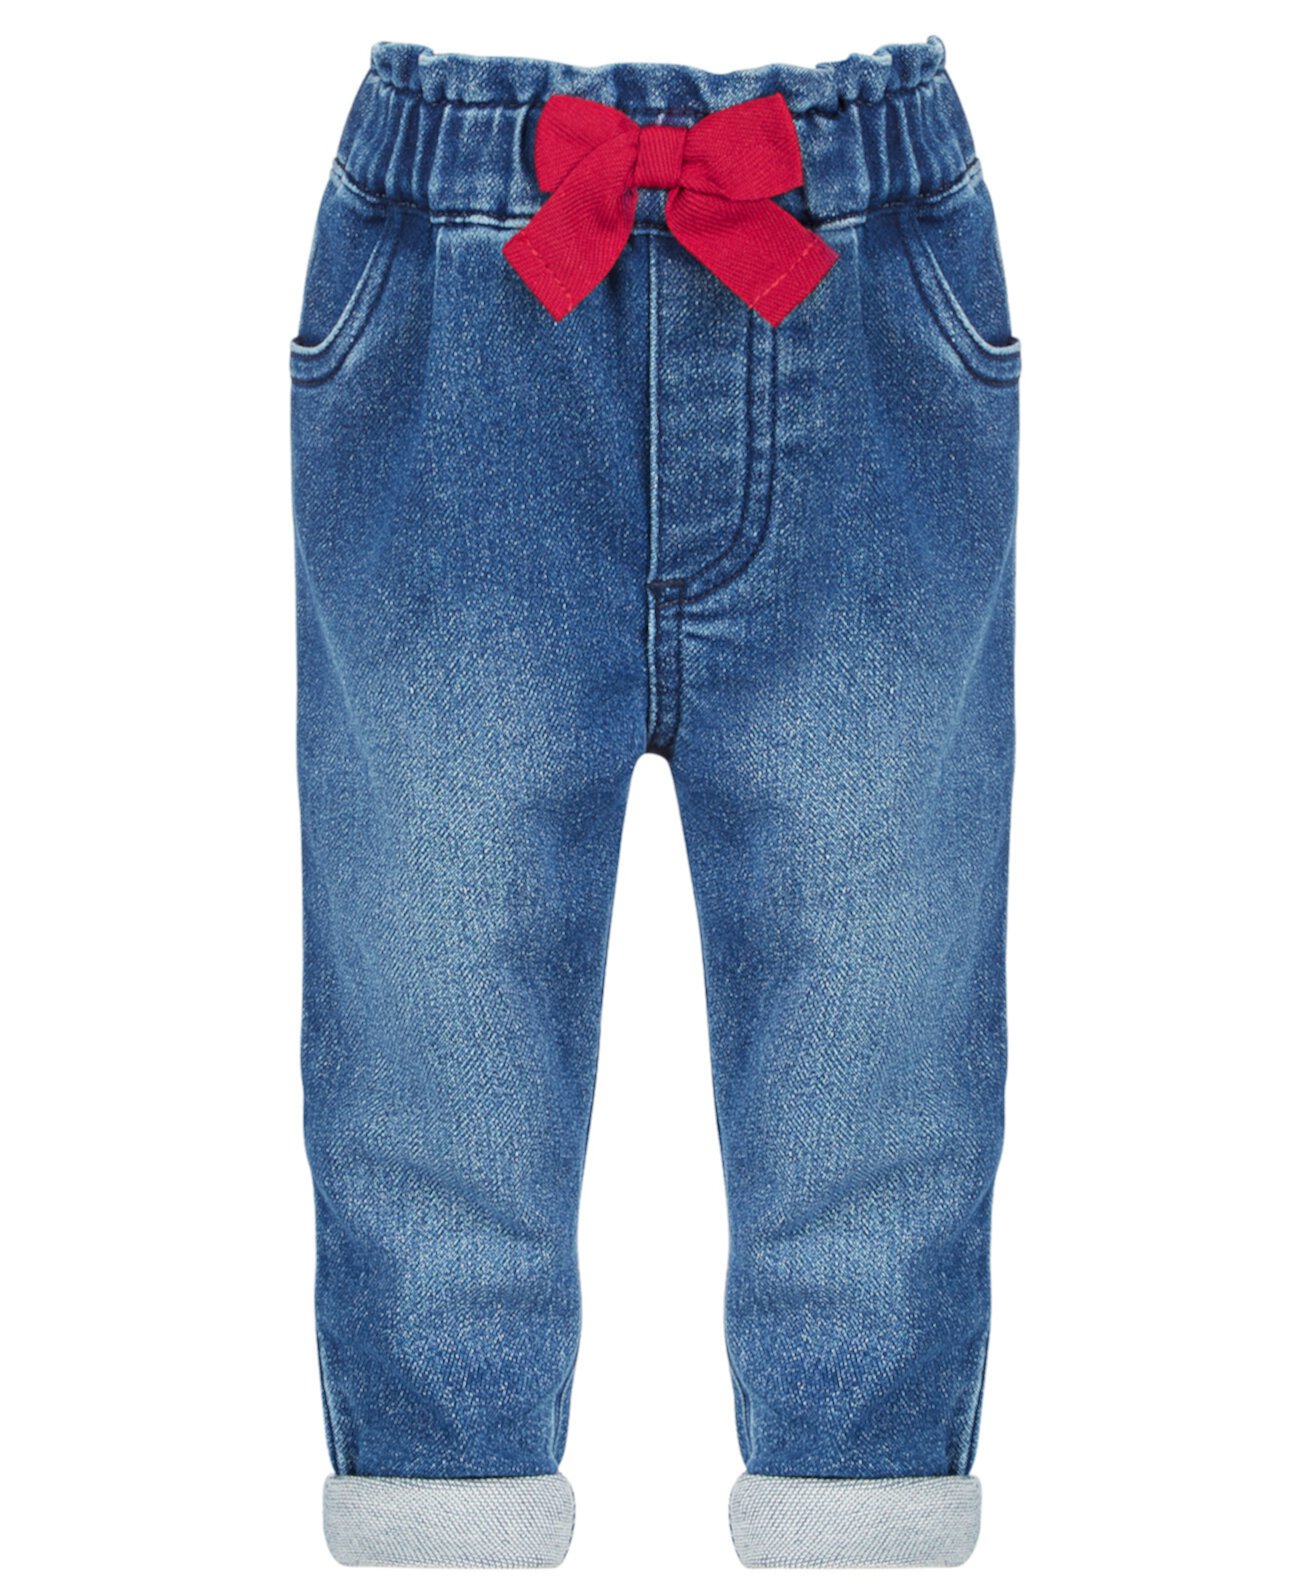 Baby Girls Red Bow Jeans, Created for Macy's First Impressions